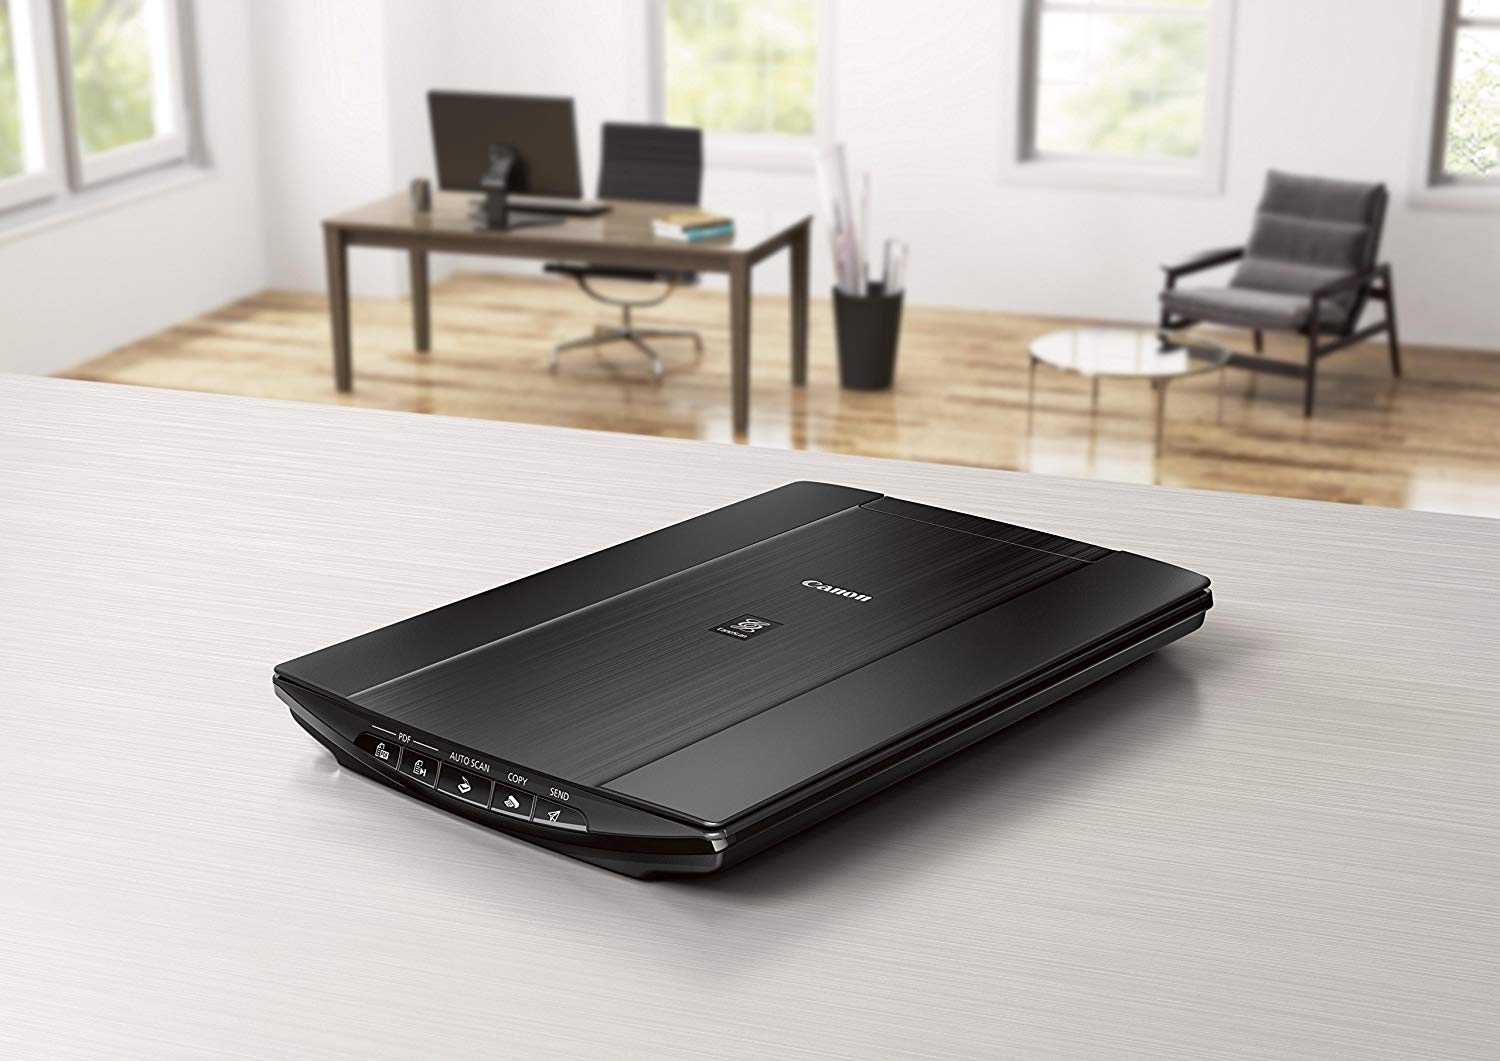 Canon CanoScan LiDE220 Photo and Document Scanner Review